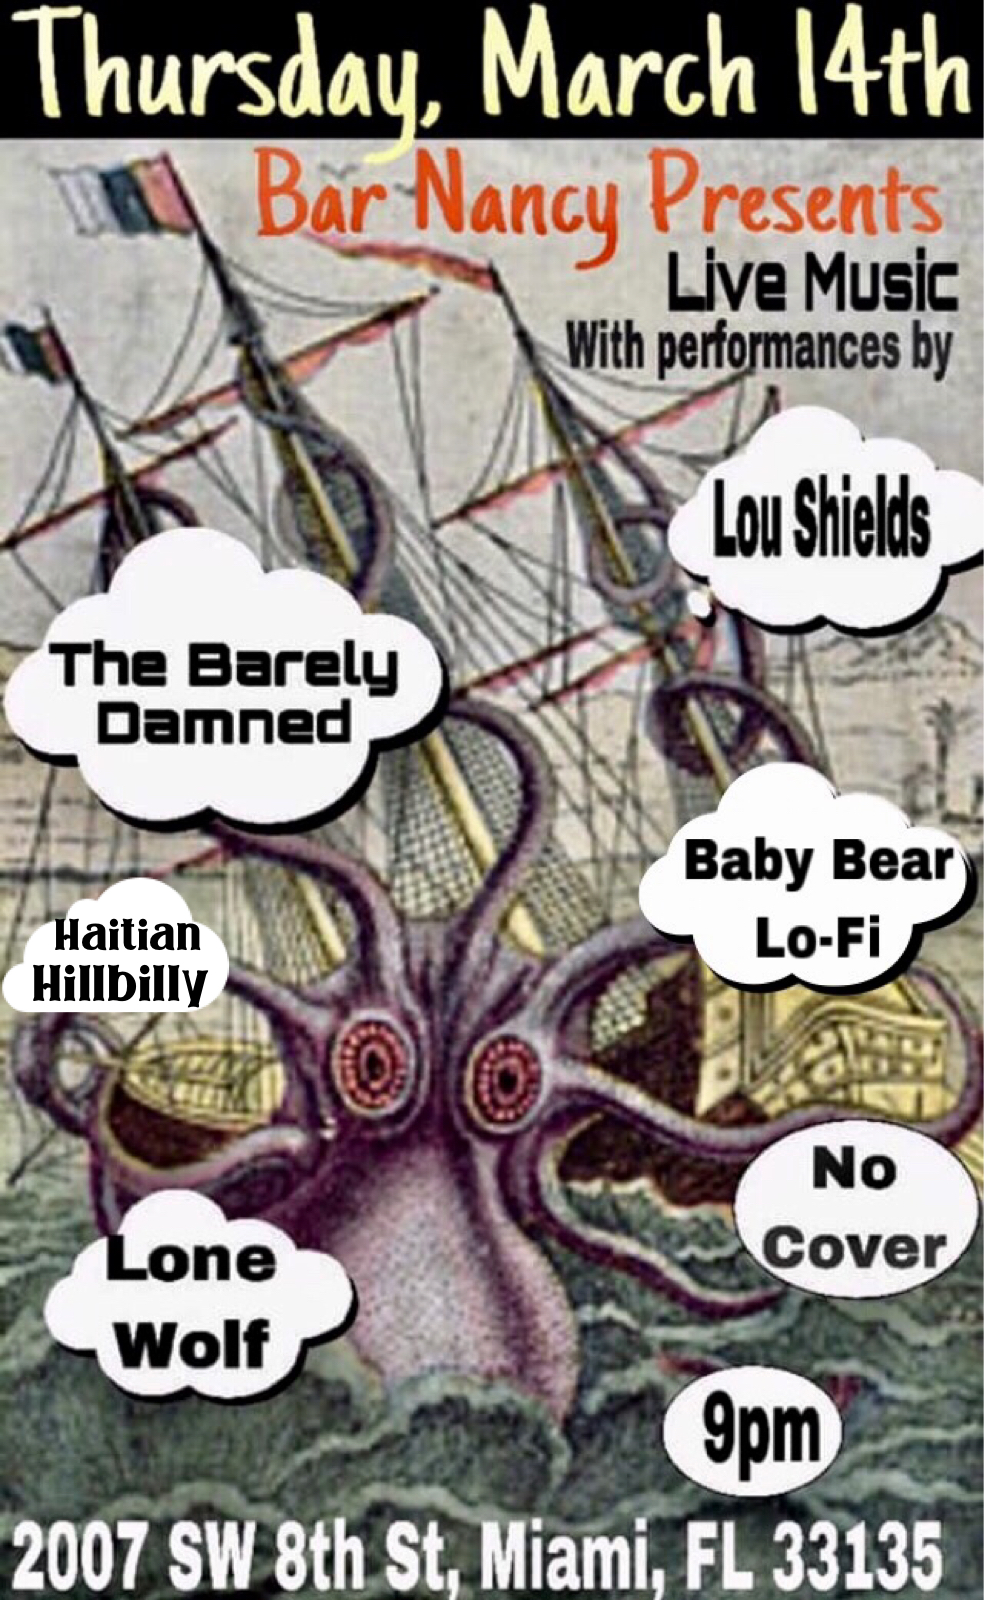 Lou Shields - The Barely Damned - Baby Bear Lo-Fi - Lone Wolf - Haitian Hillbilly - @ Br Nancy March 14 - No Cover - 9PM